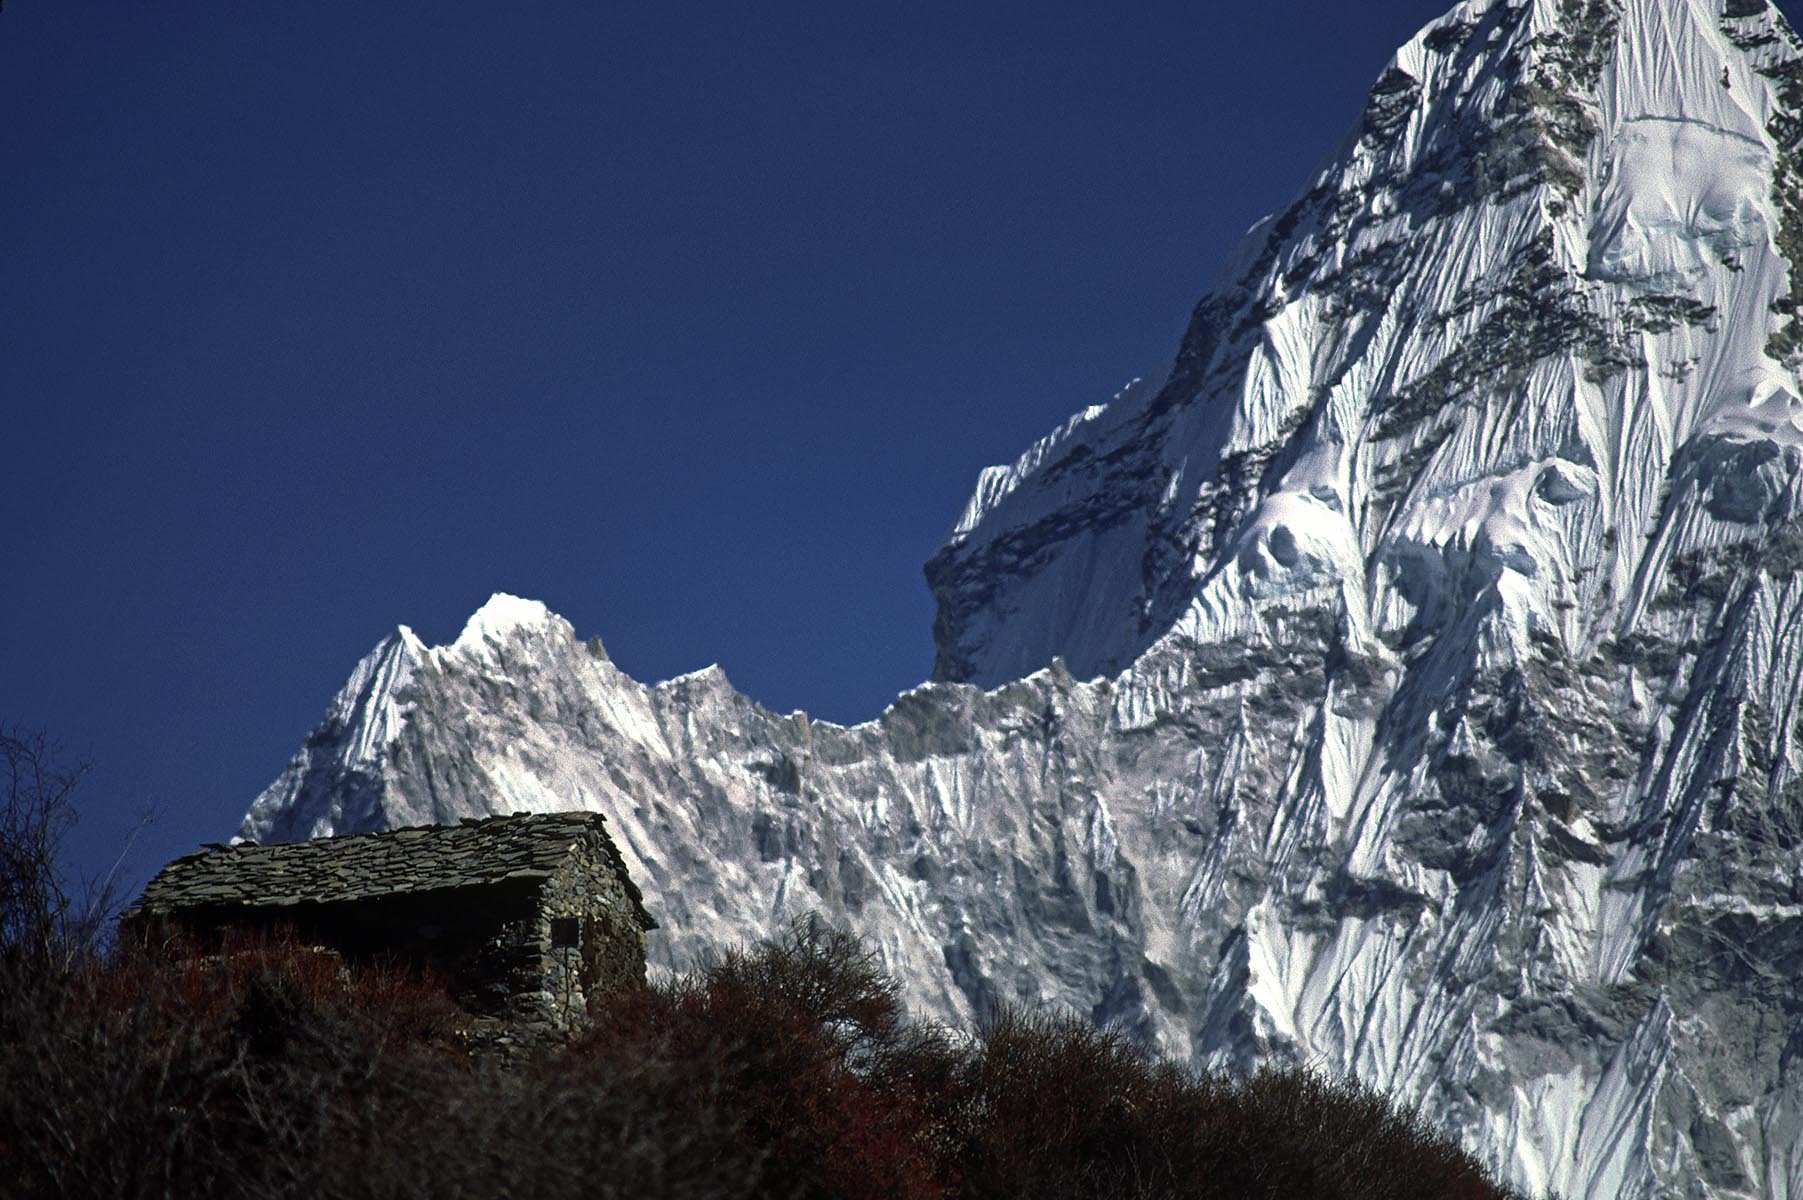 A tea house sits in front of Ama Dablam (which means mother cradling a child) & reaches a height of 22,493 ft - KHUMBU DISTRICT, NEPAL